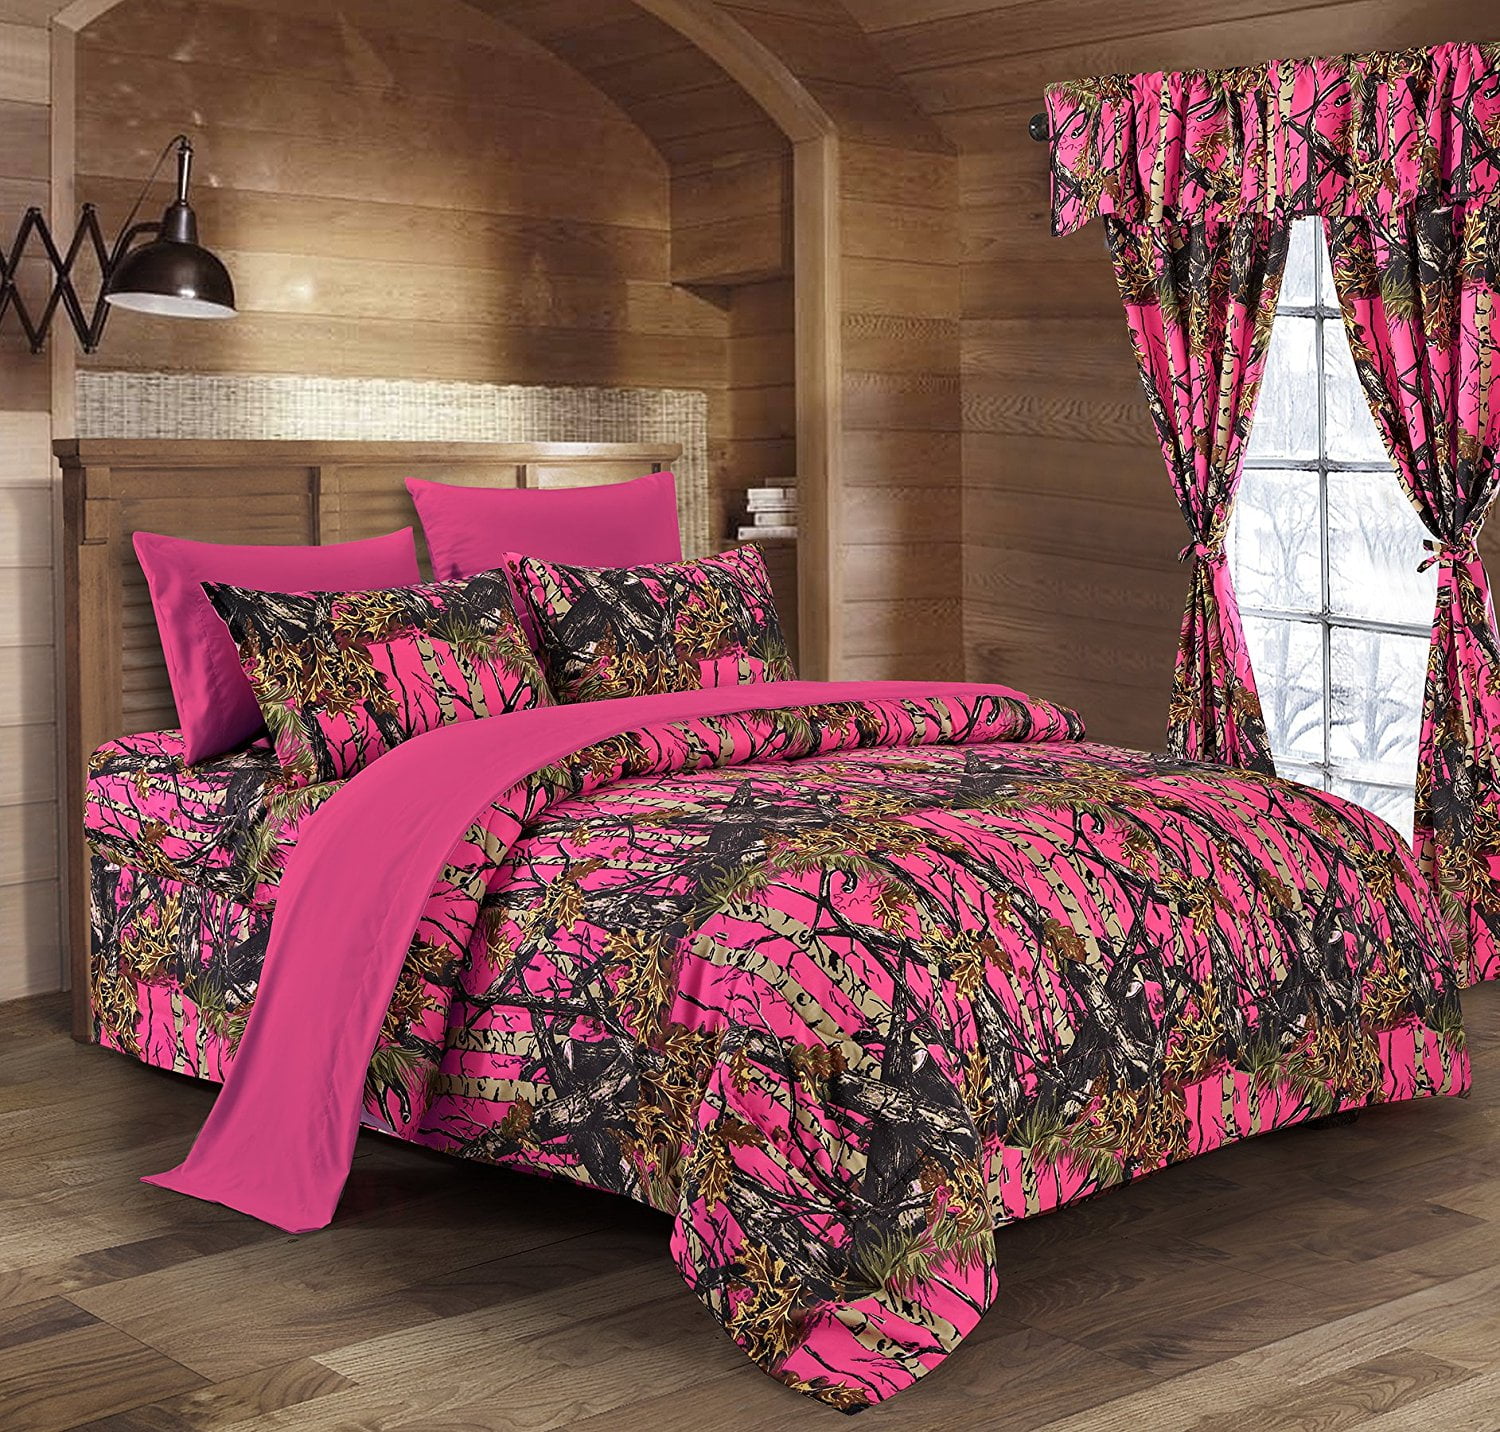 bedding camouflage